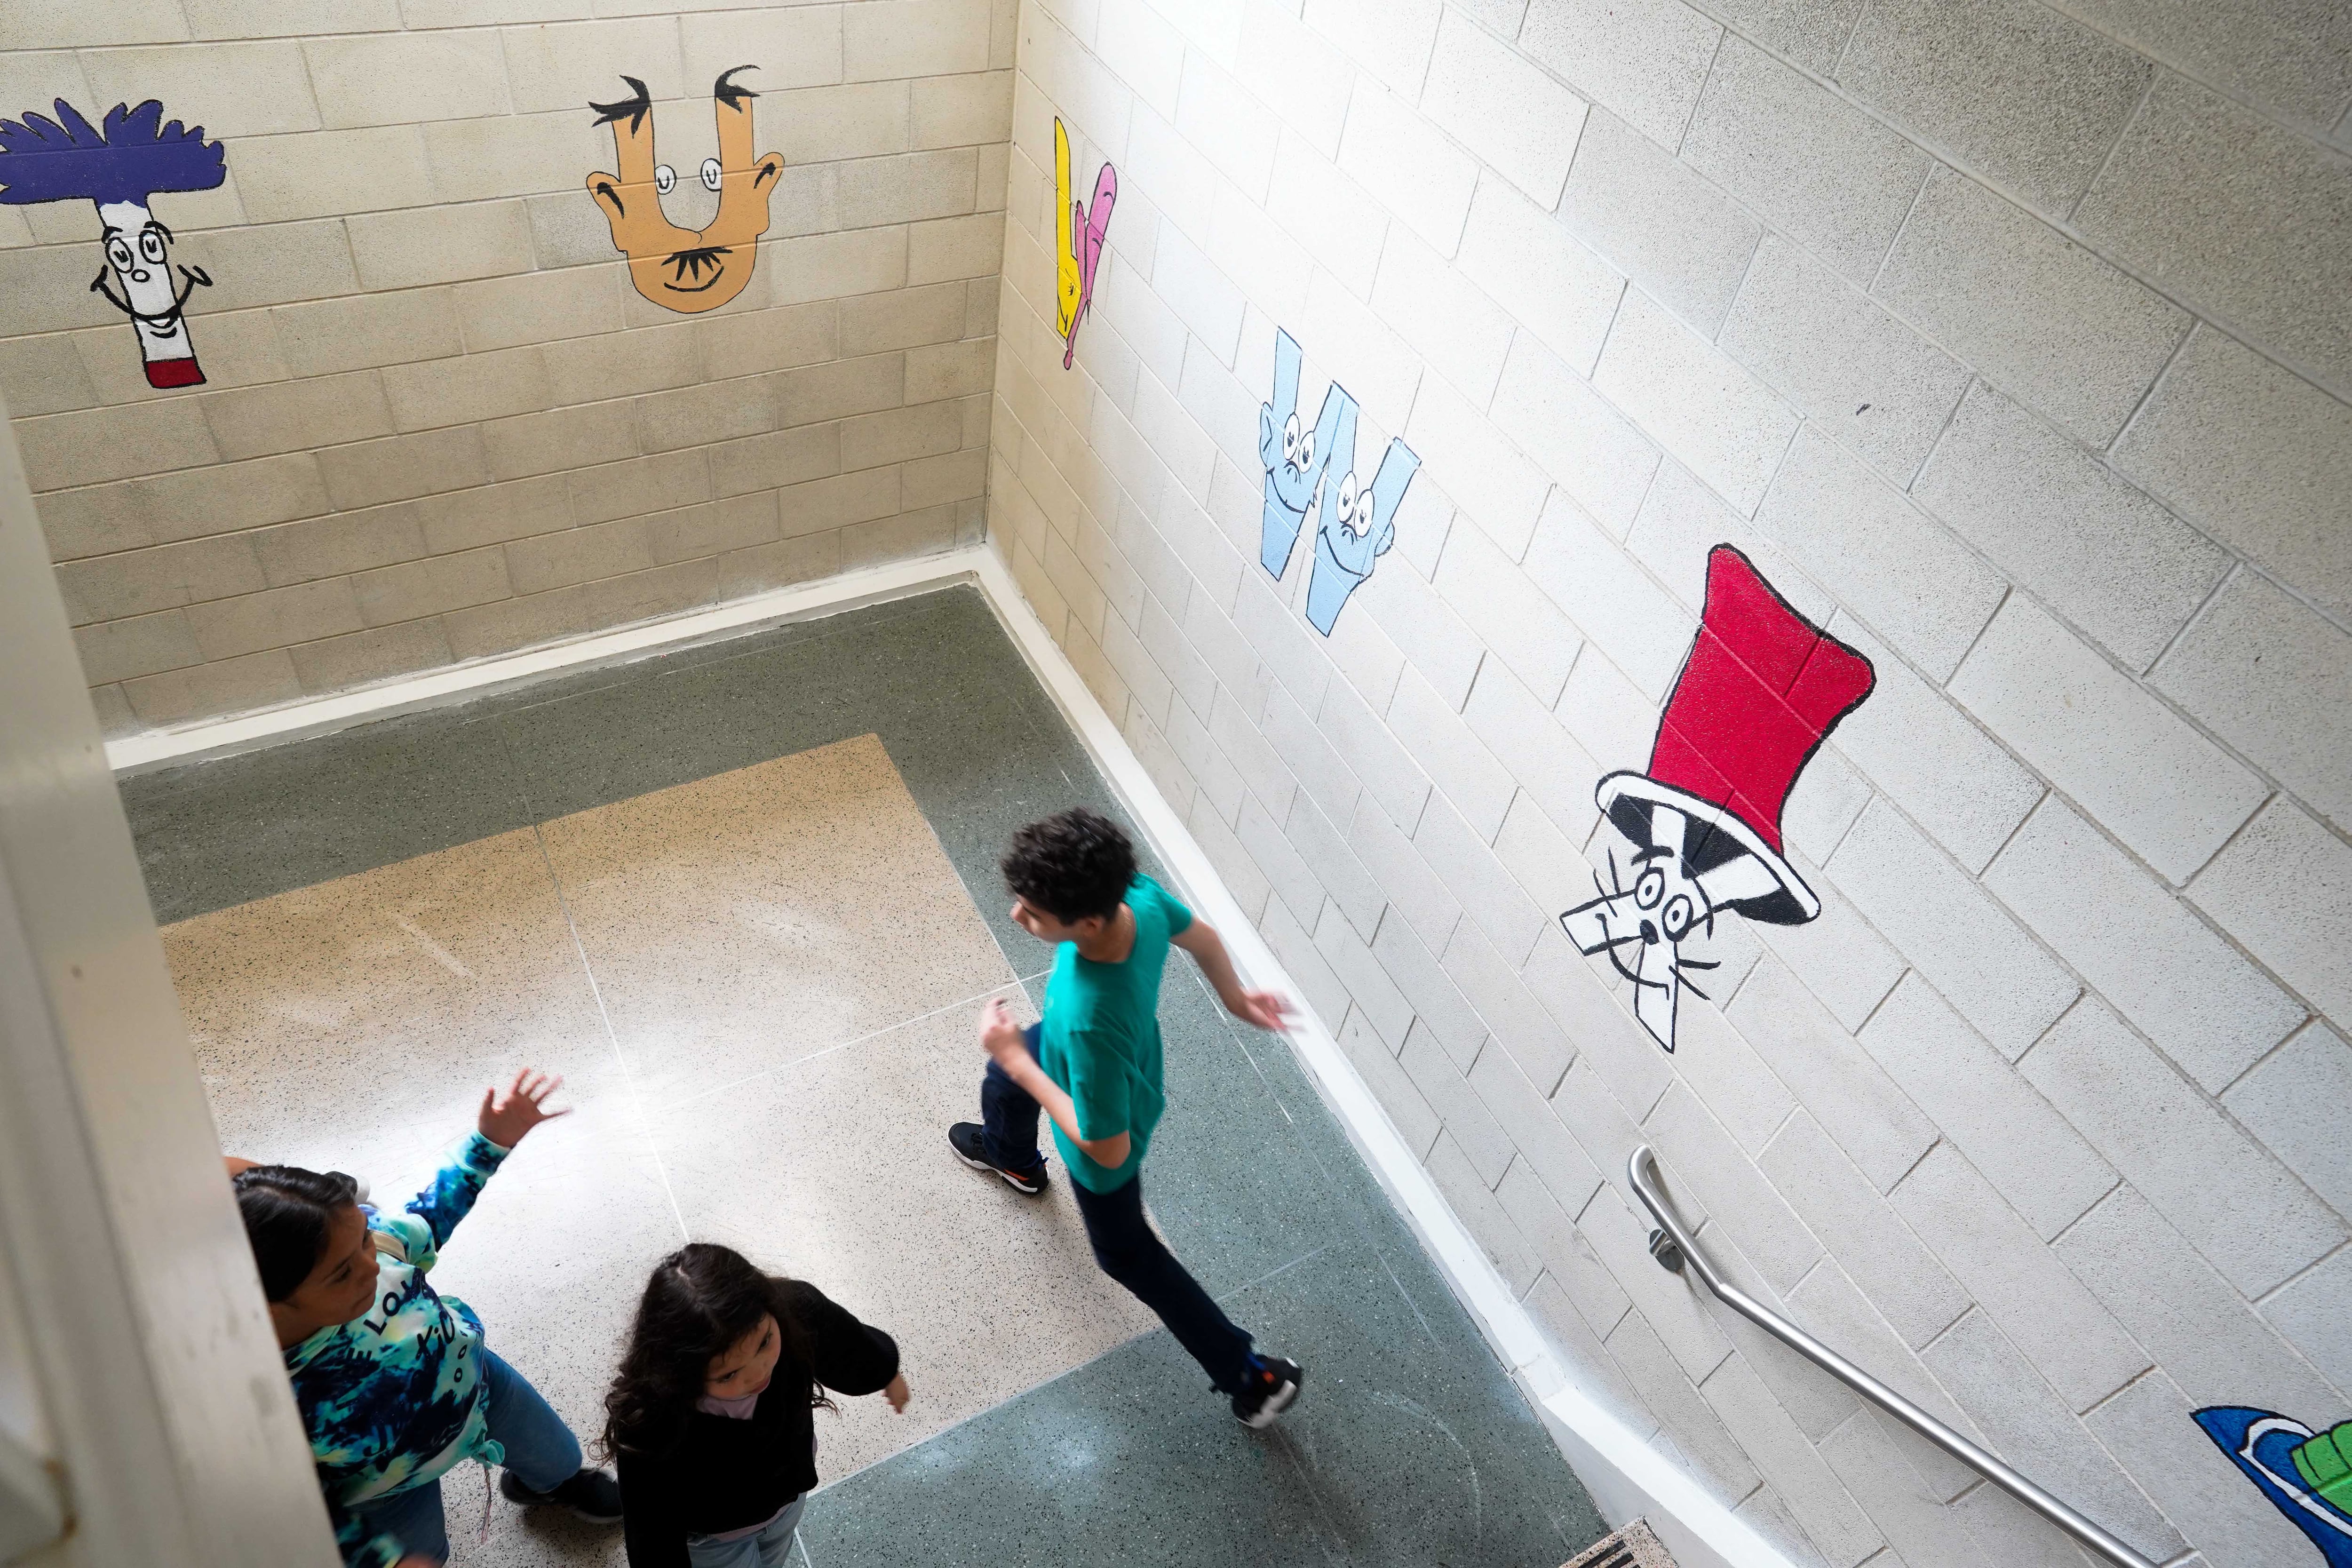 Students run in a stairwell decorated with letters with faces.